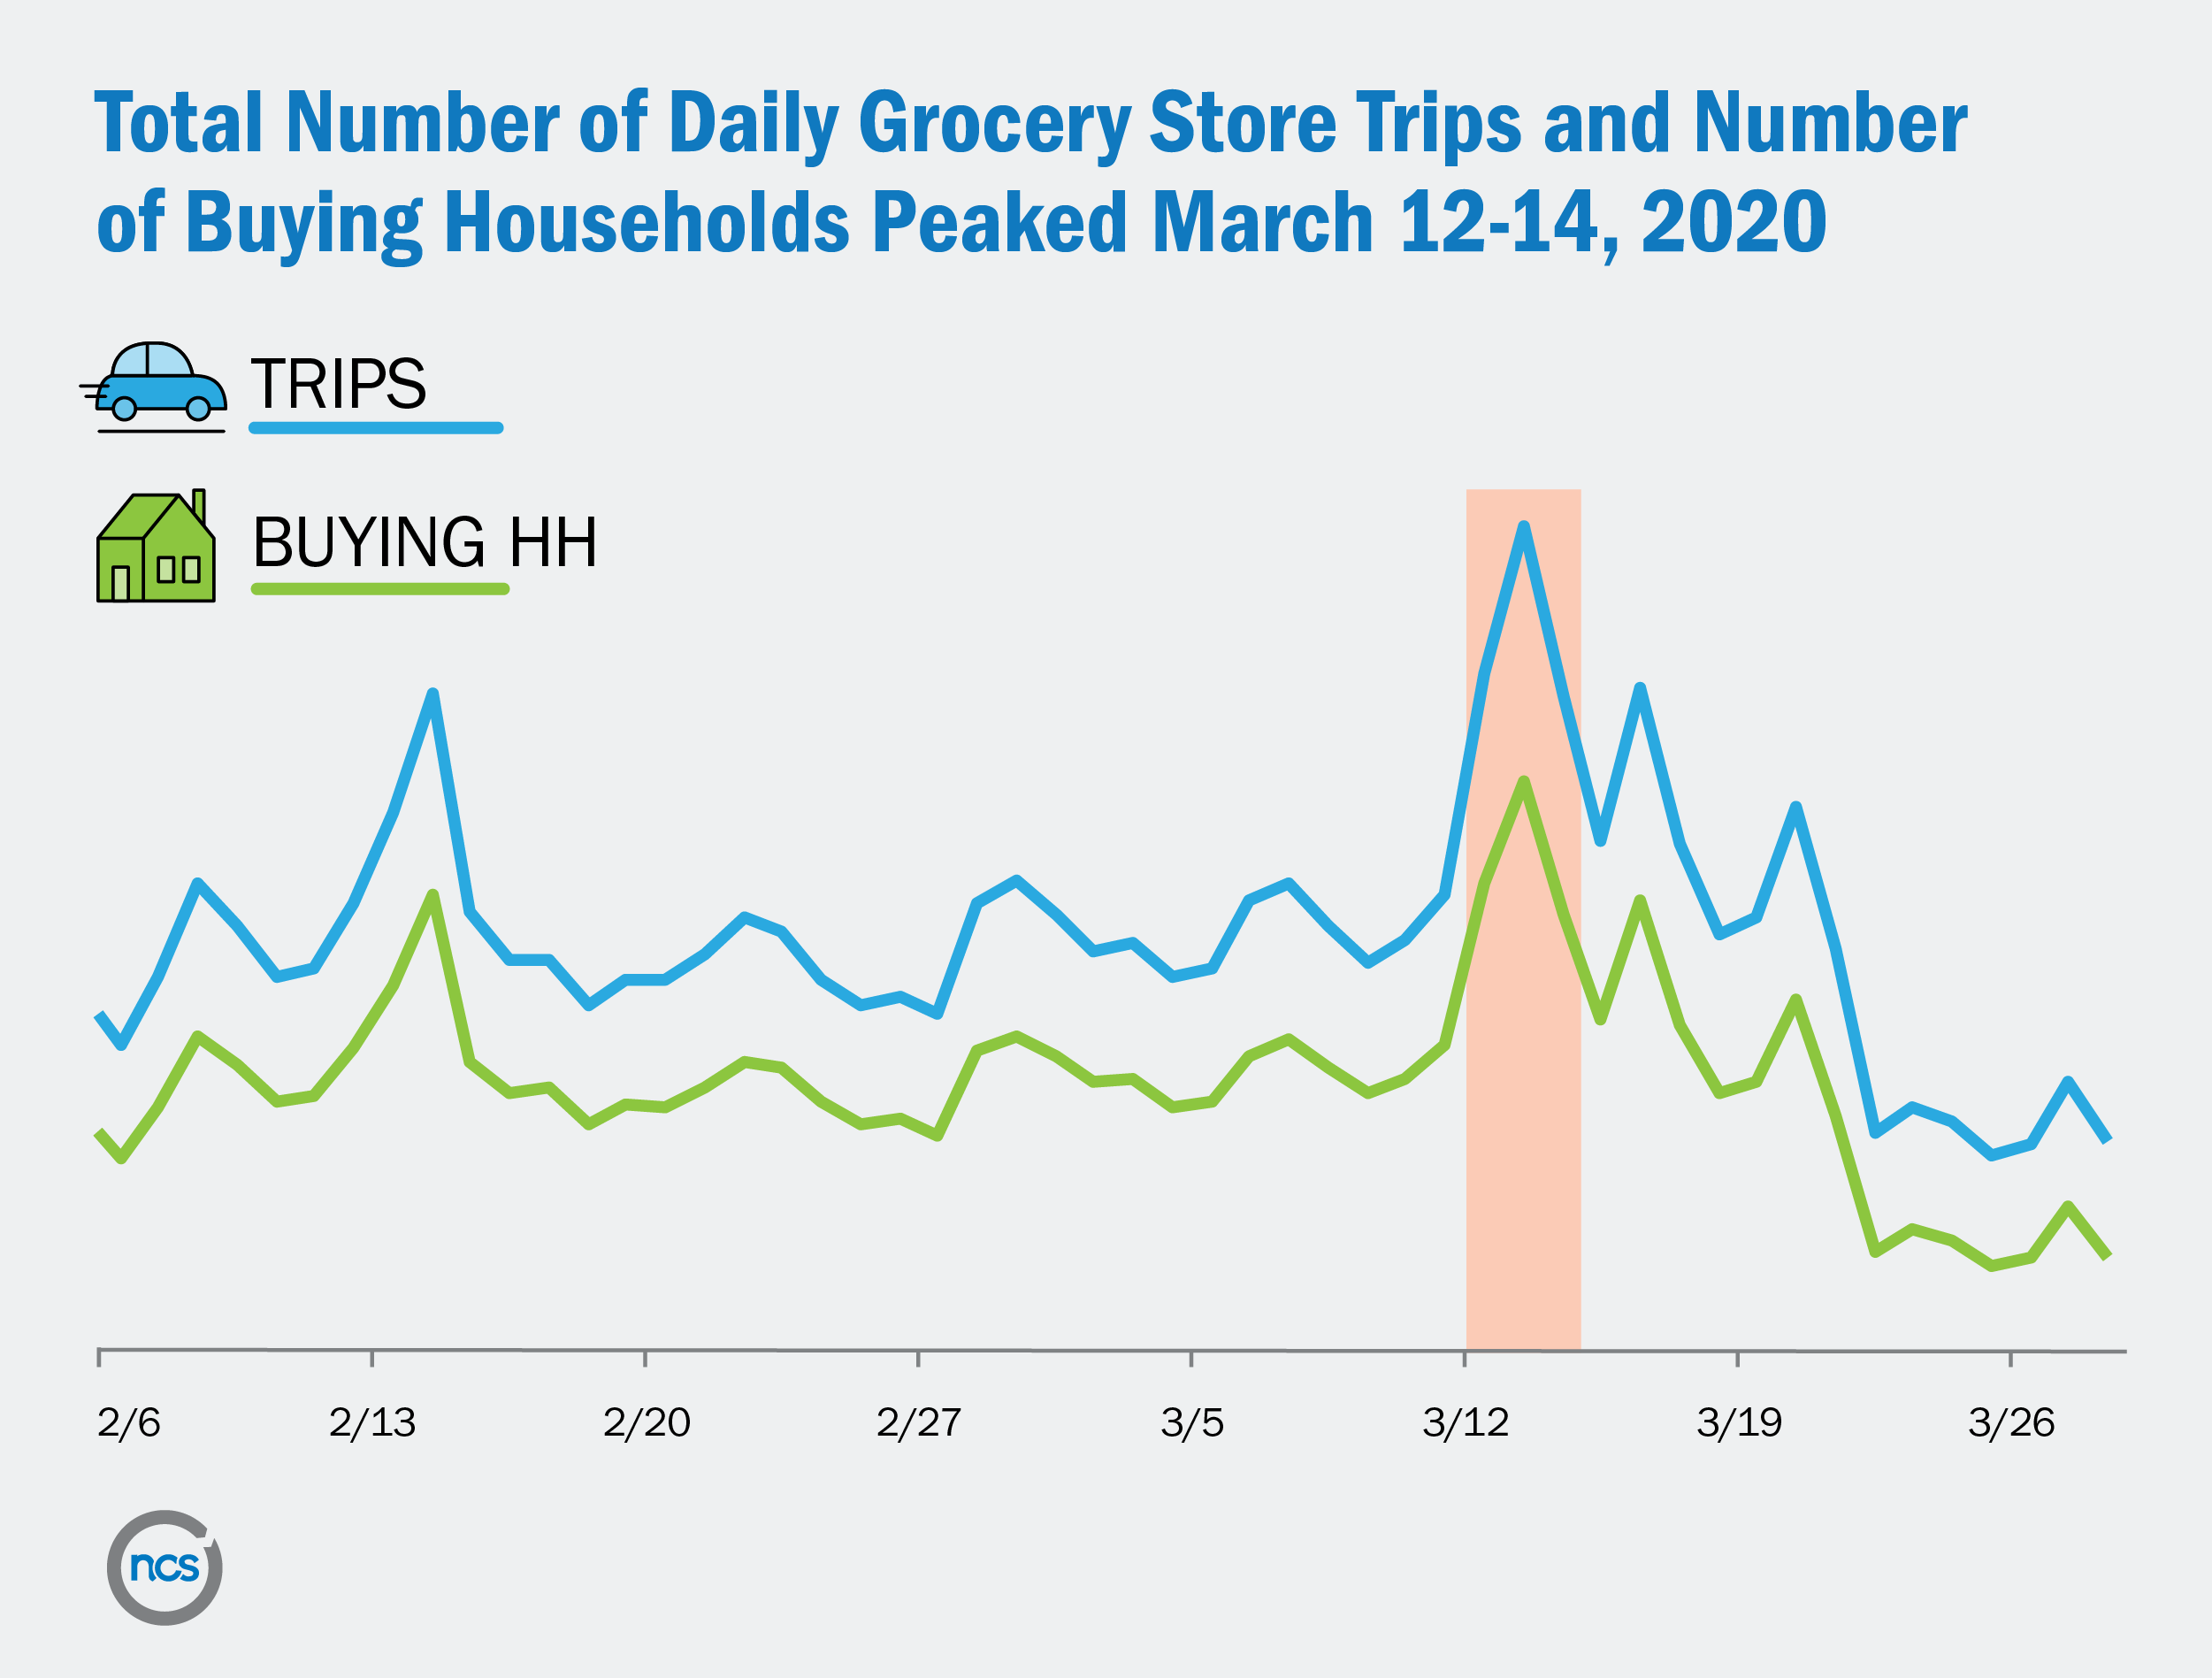 Total number of daily grocery store trips and number of buying households peaked March 12-14 2020.